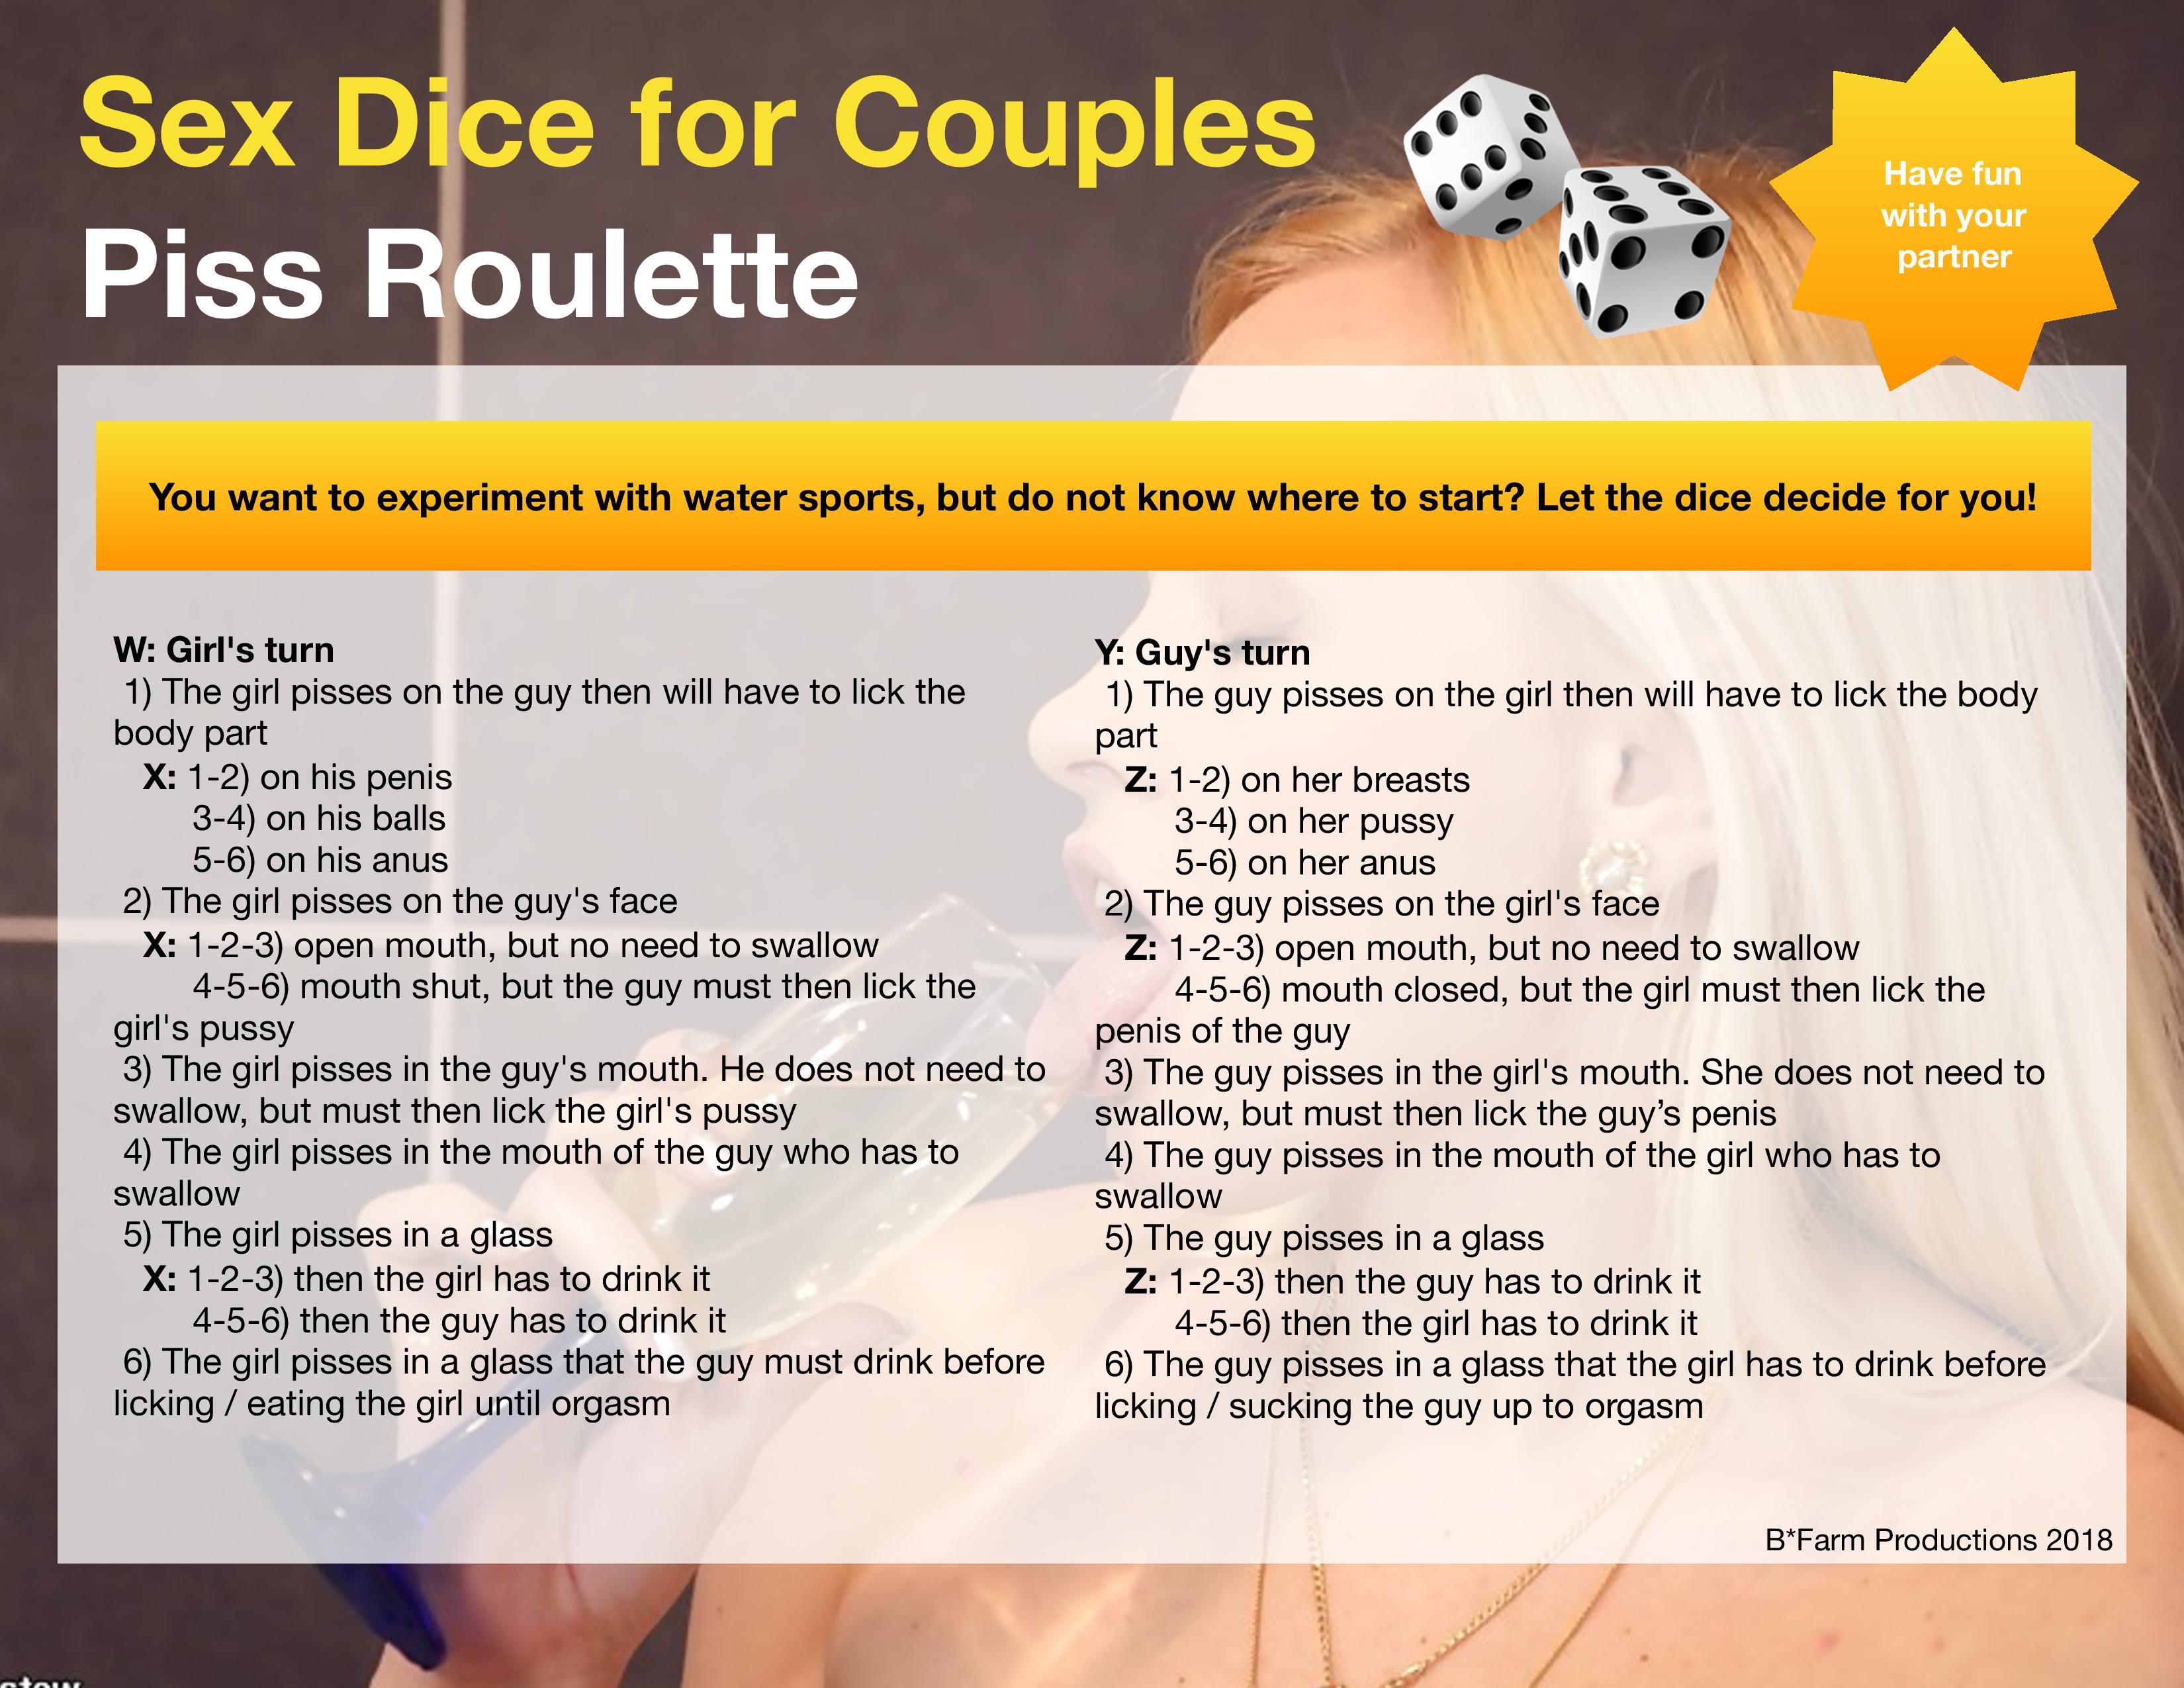 Sex Dice for Couples Piss Roulette pic